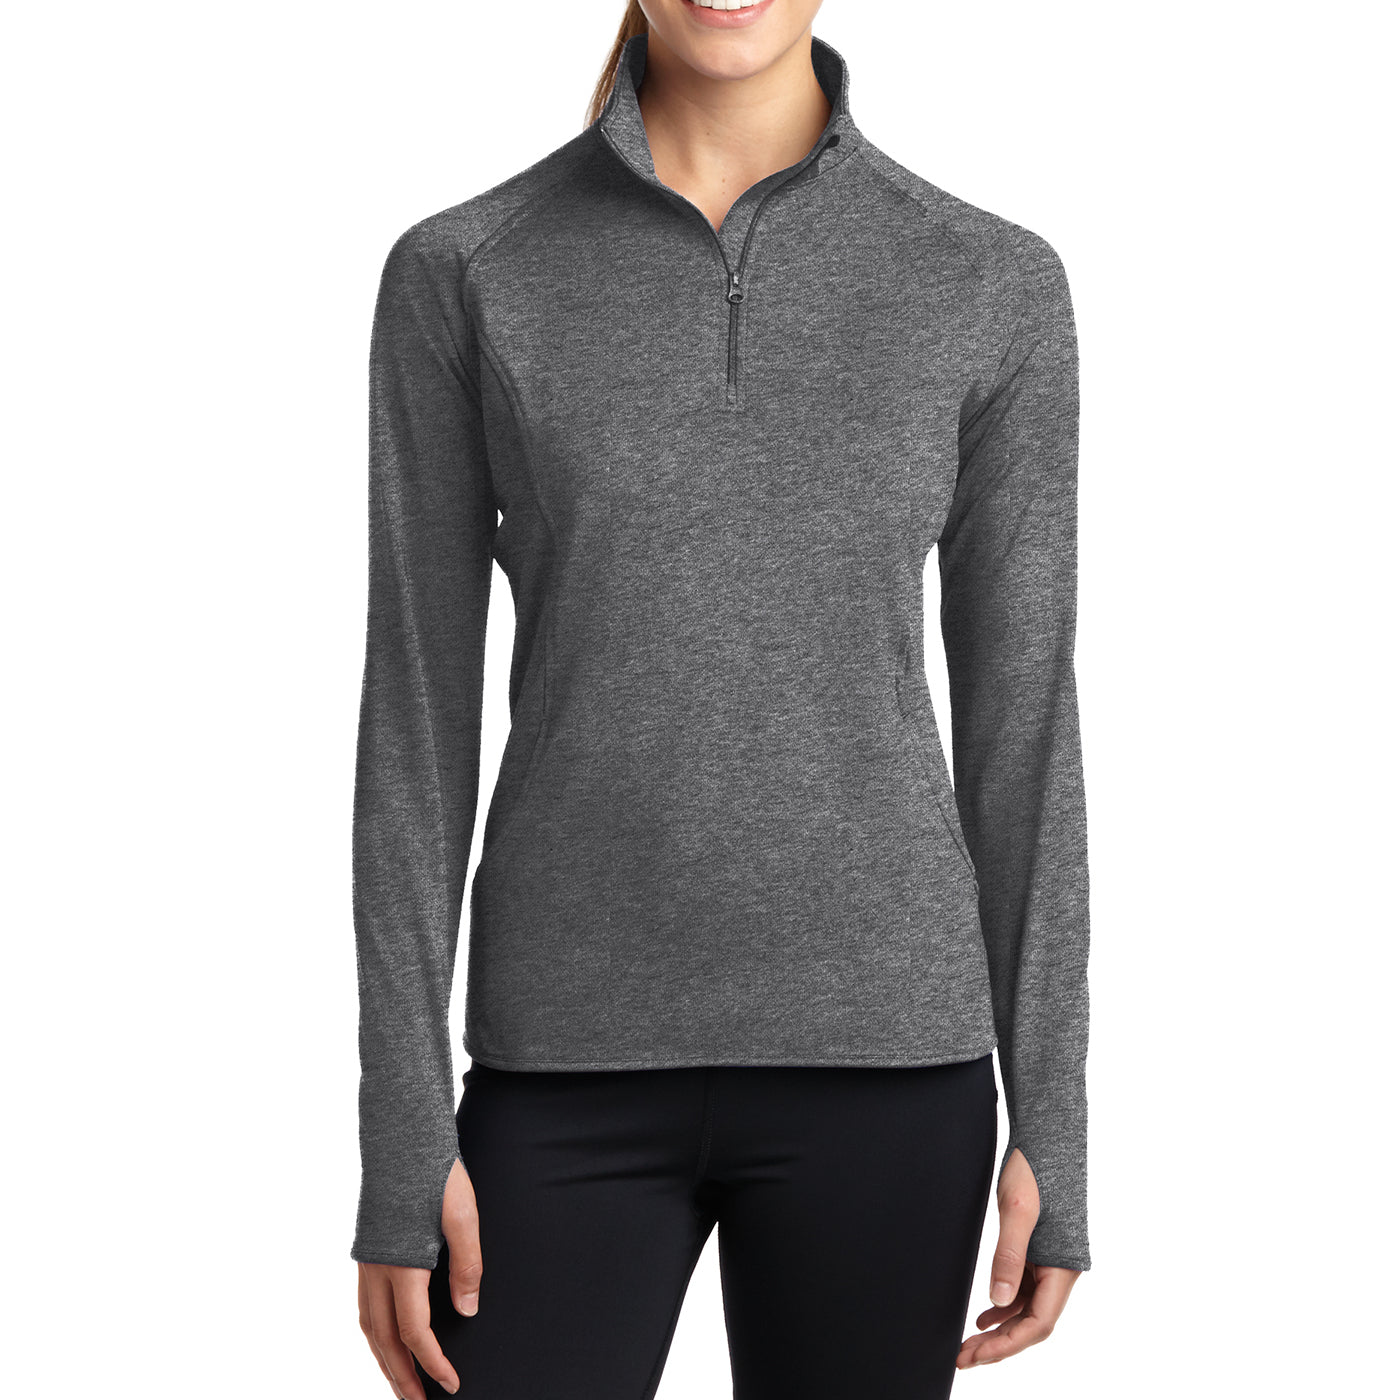 Women's Sport Wick Stretch 1/2 Zip Pullover - Charcoal Grey Heather - Front